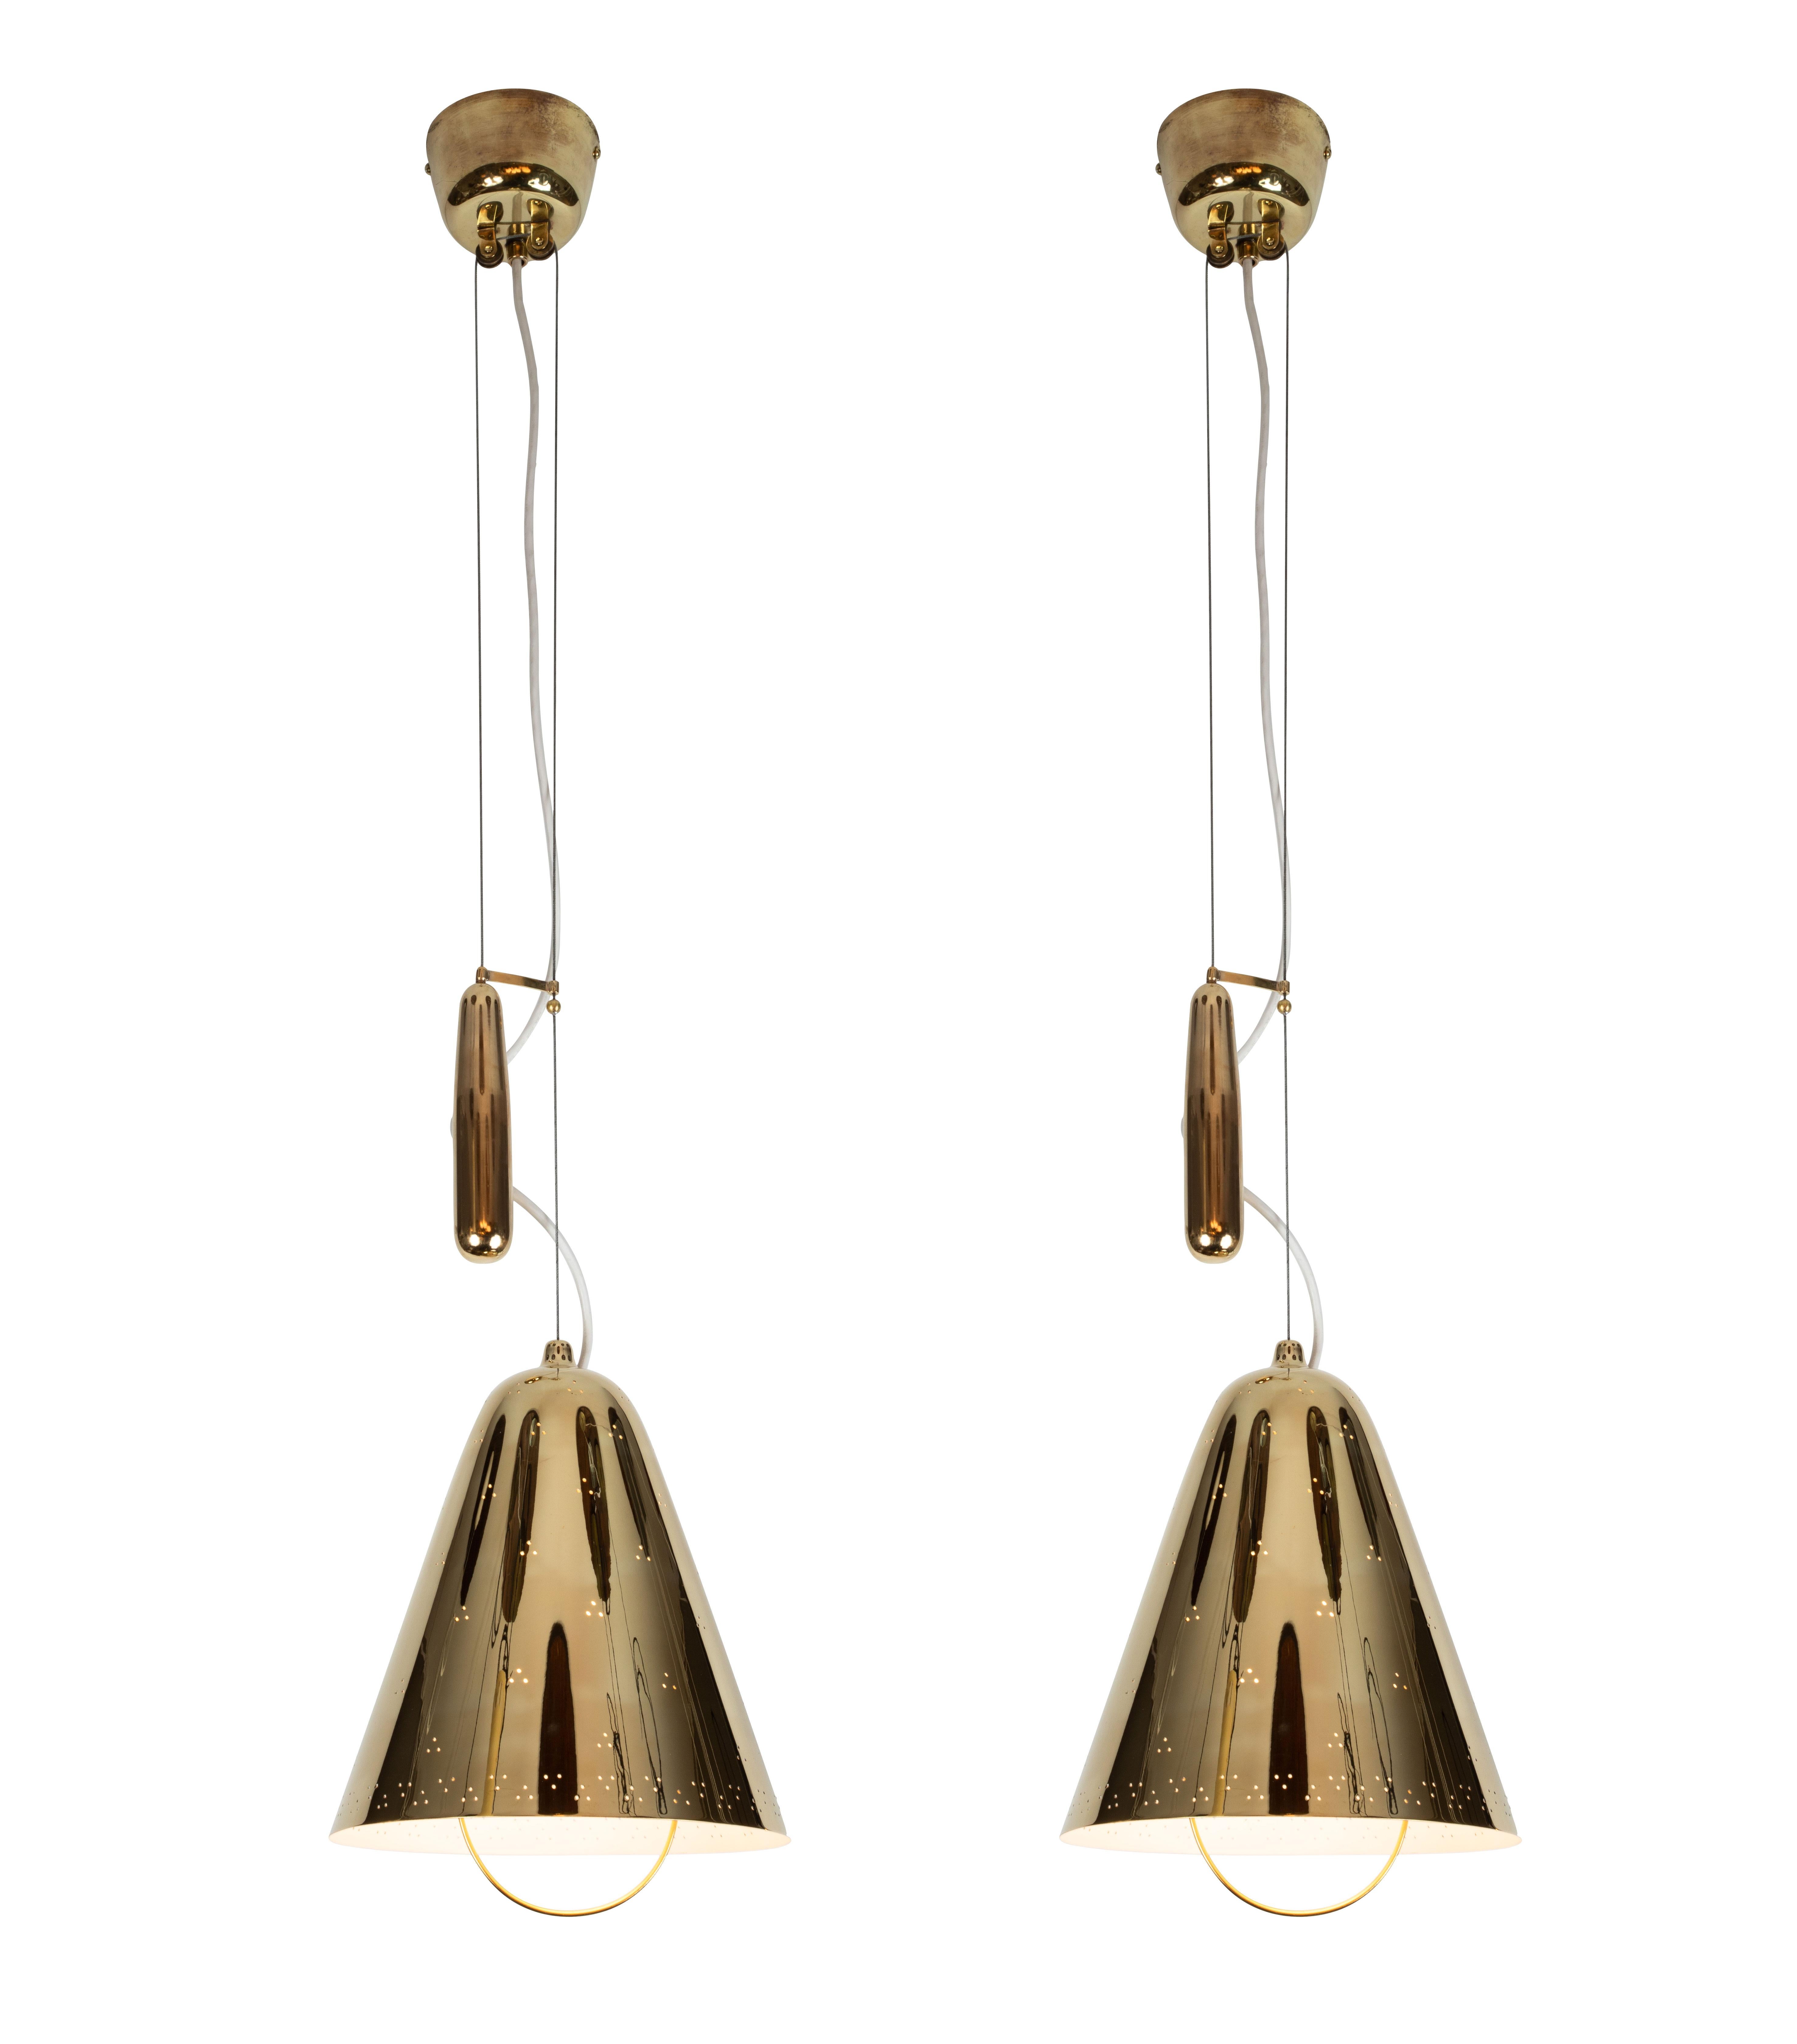 1940s Paavo Tynell 'A1942' counterweight pendant for Taito Oy. This rare and exceptional lamp is executed in brass, and can be raised and lowered using its ingenious counterweight and pulley system. Manufactured by Taito Oy in the early 1950s, this